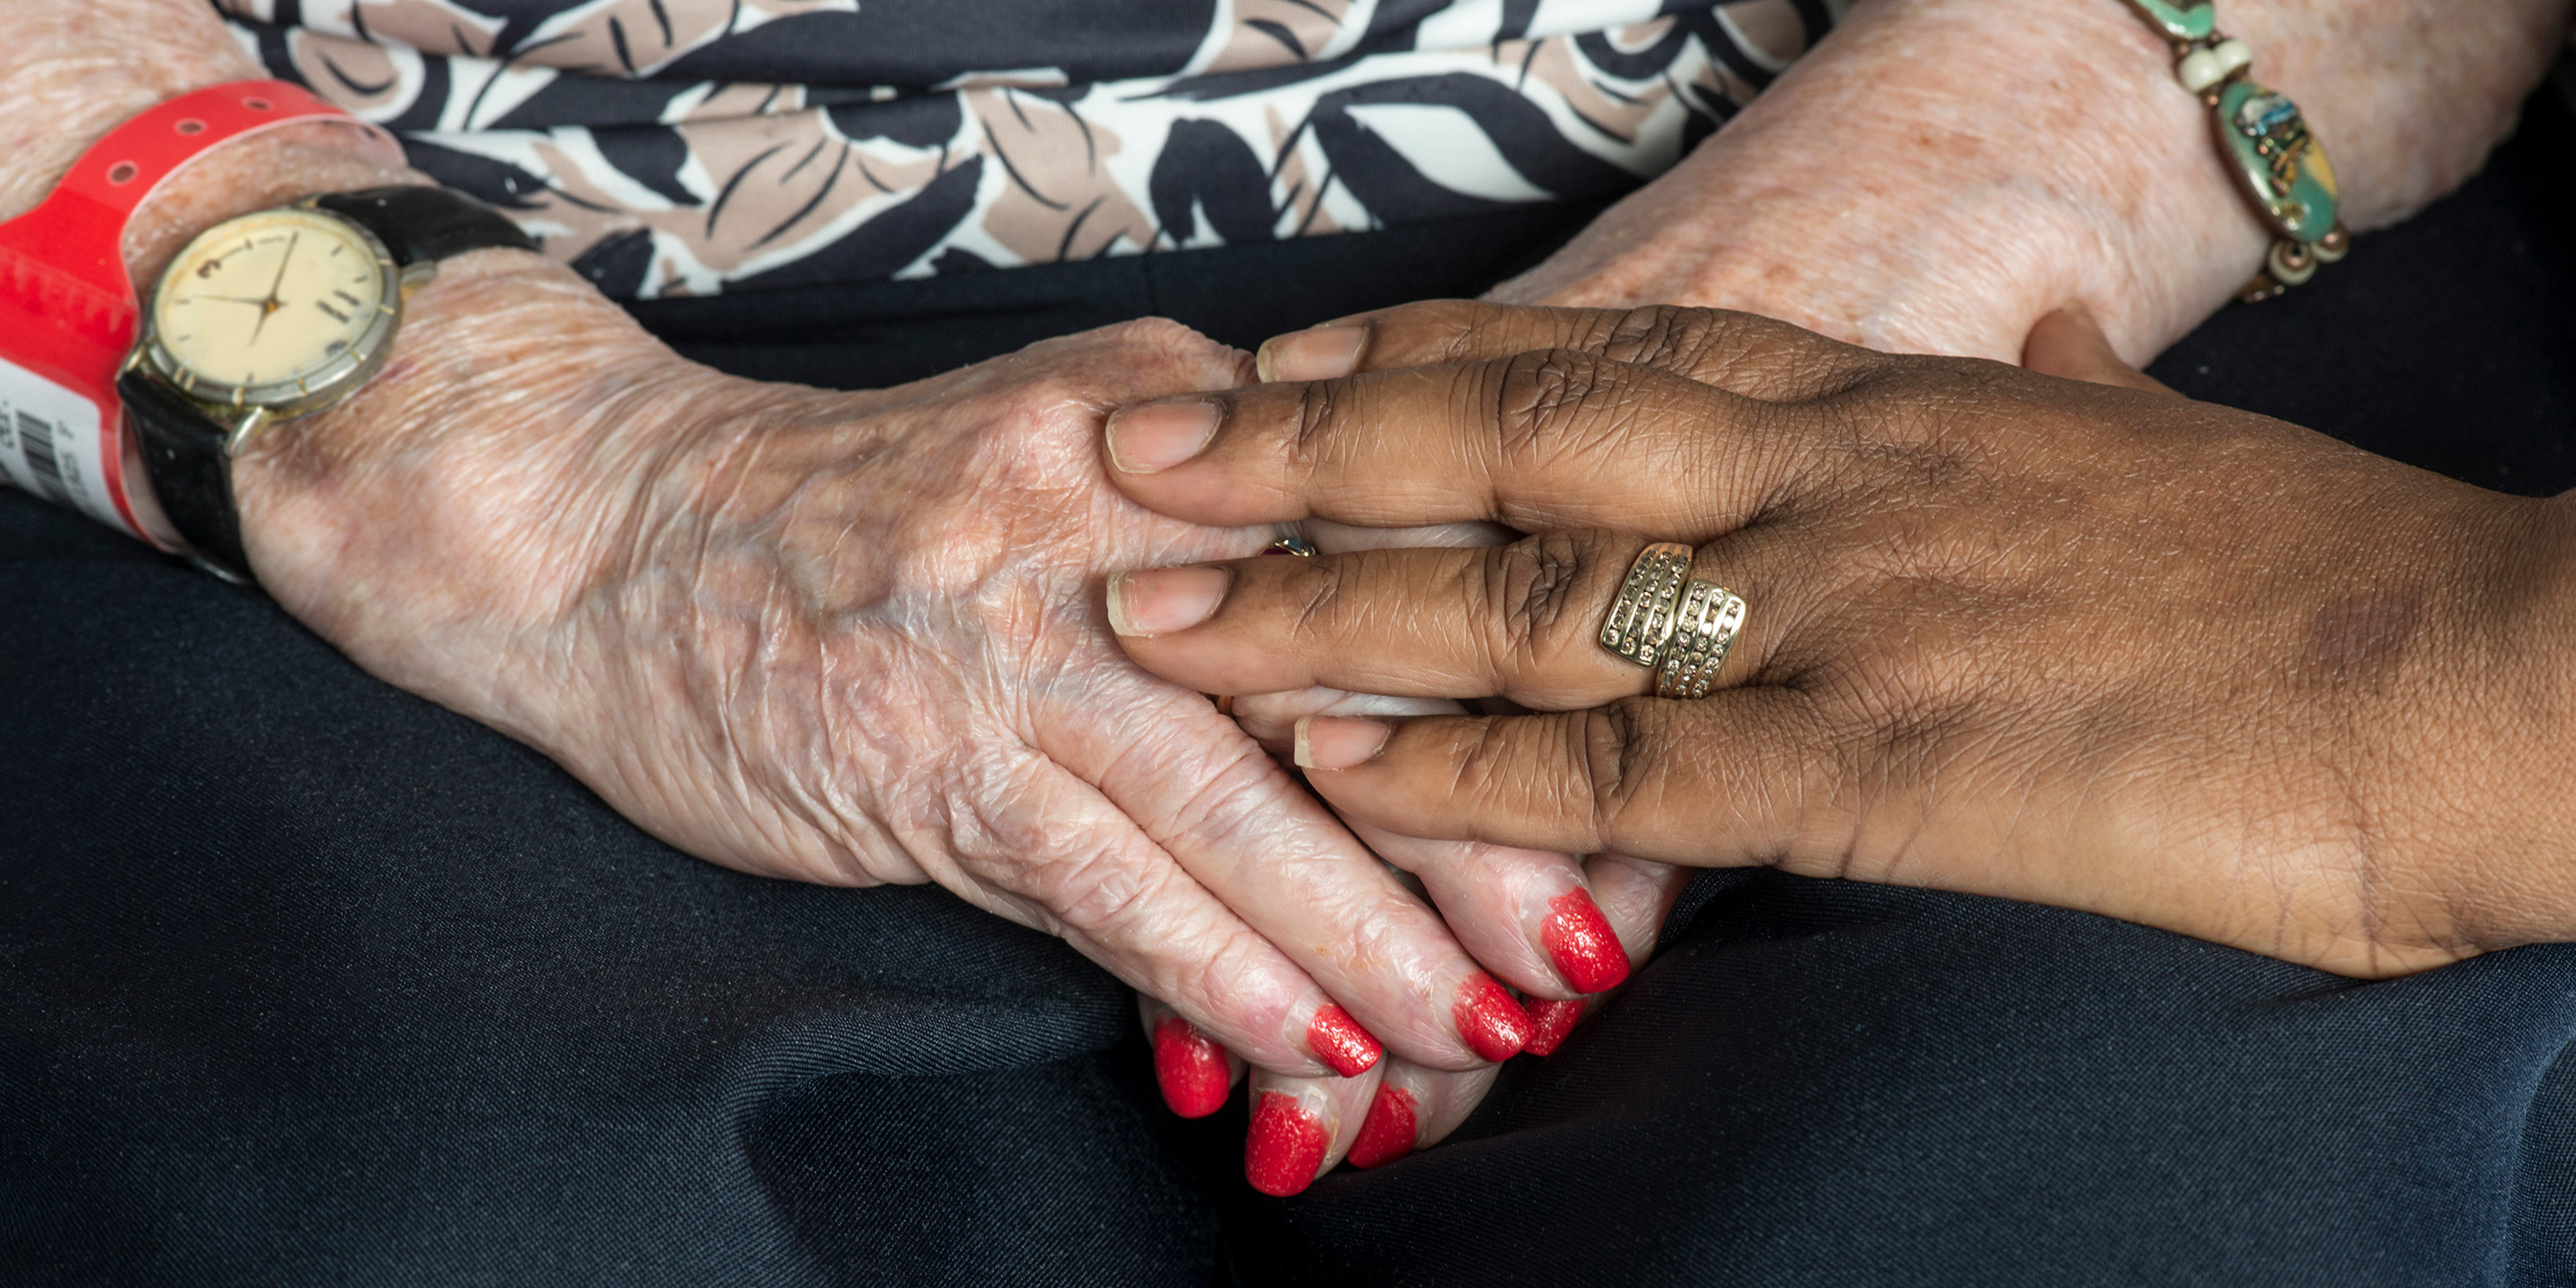 A close up of two women's hands - one woman has her hands in her lap while the other woman pats her hand.